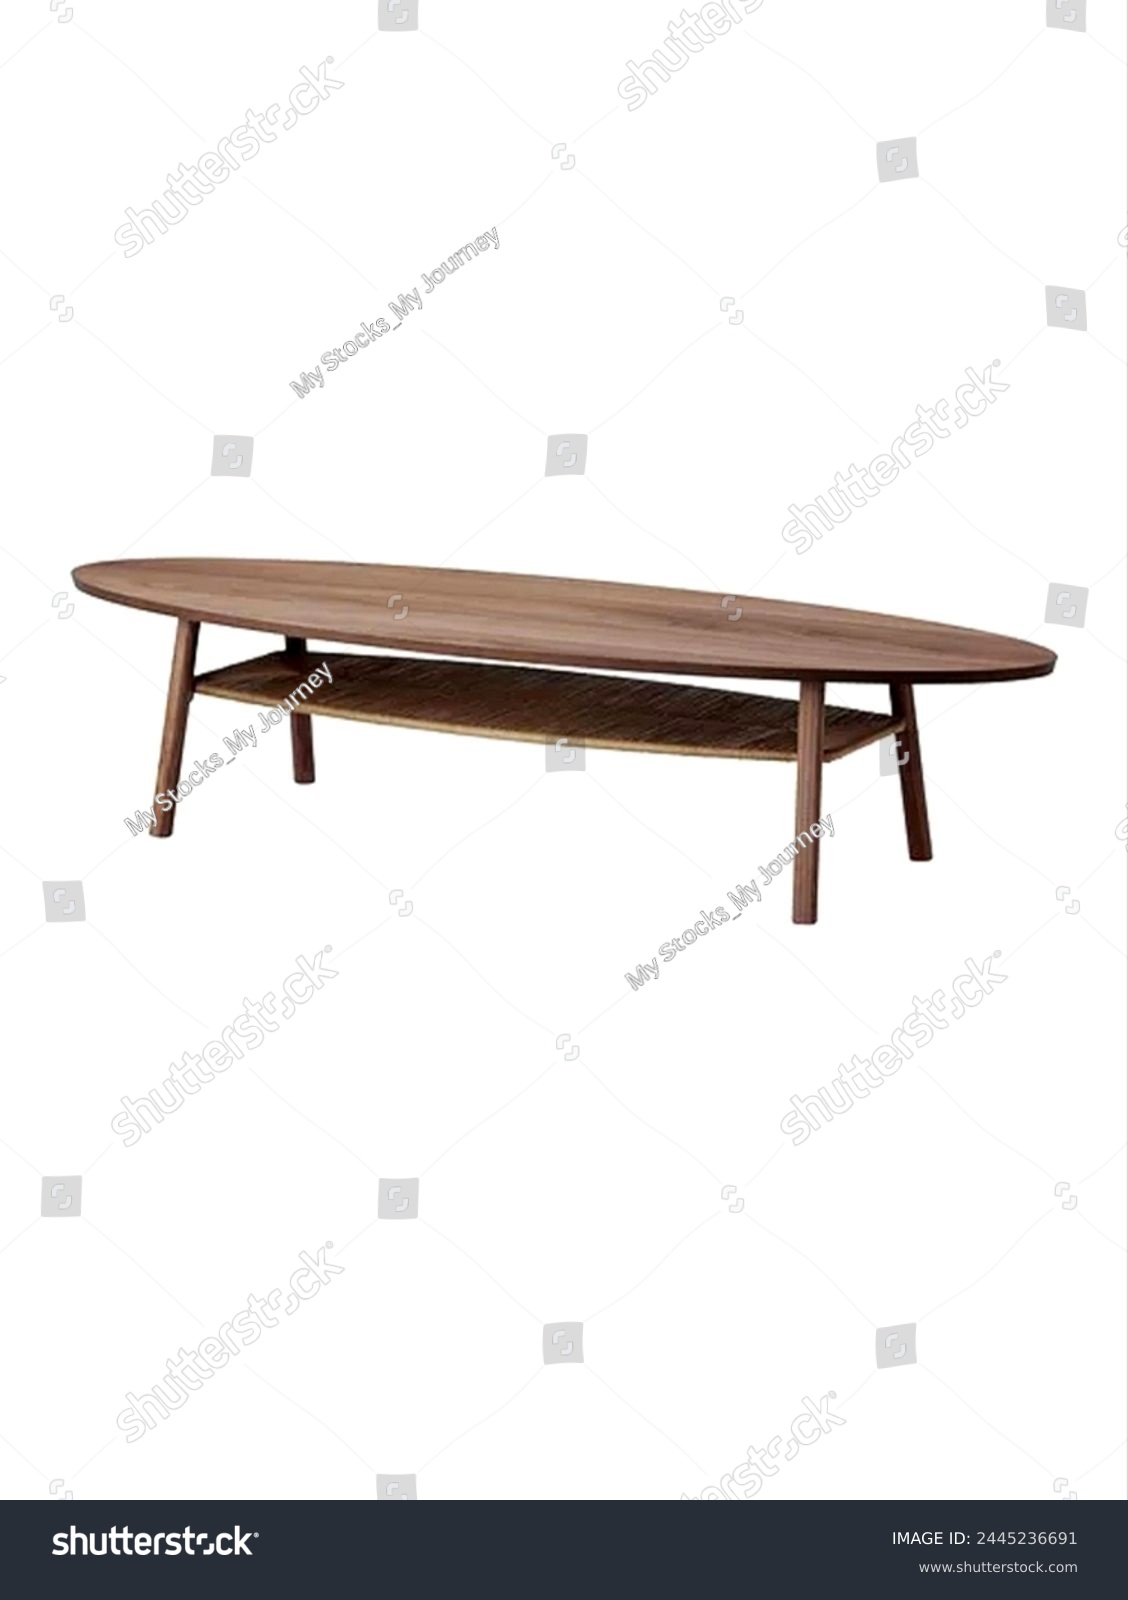 Furniture. Coffee table, oval top with one lower rack and four legs made of oakwood in walnut veneer color. #2445236691